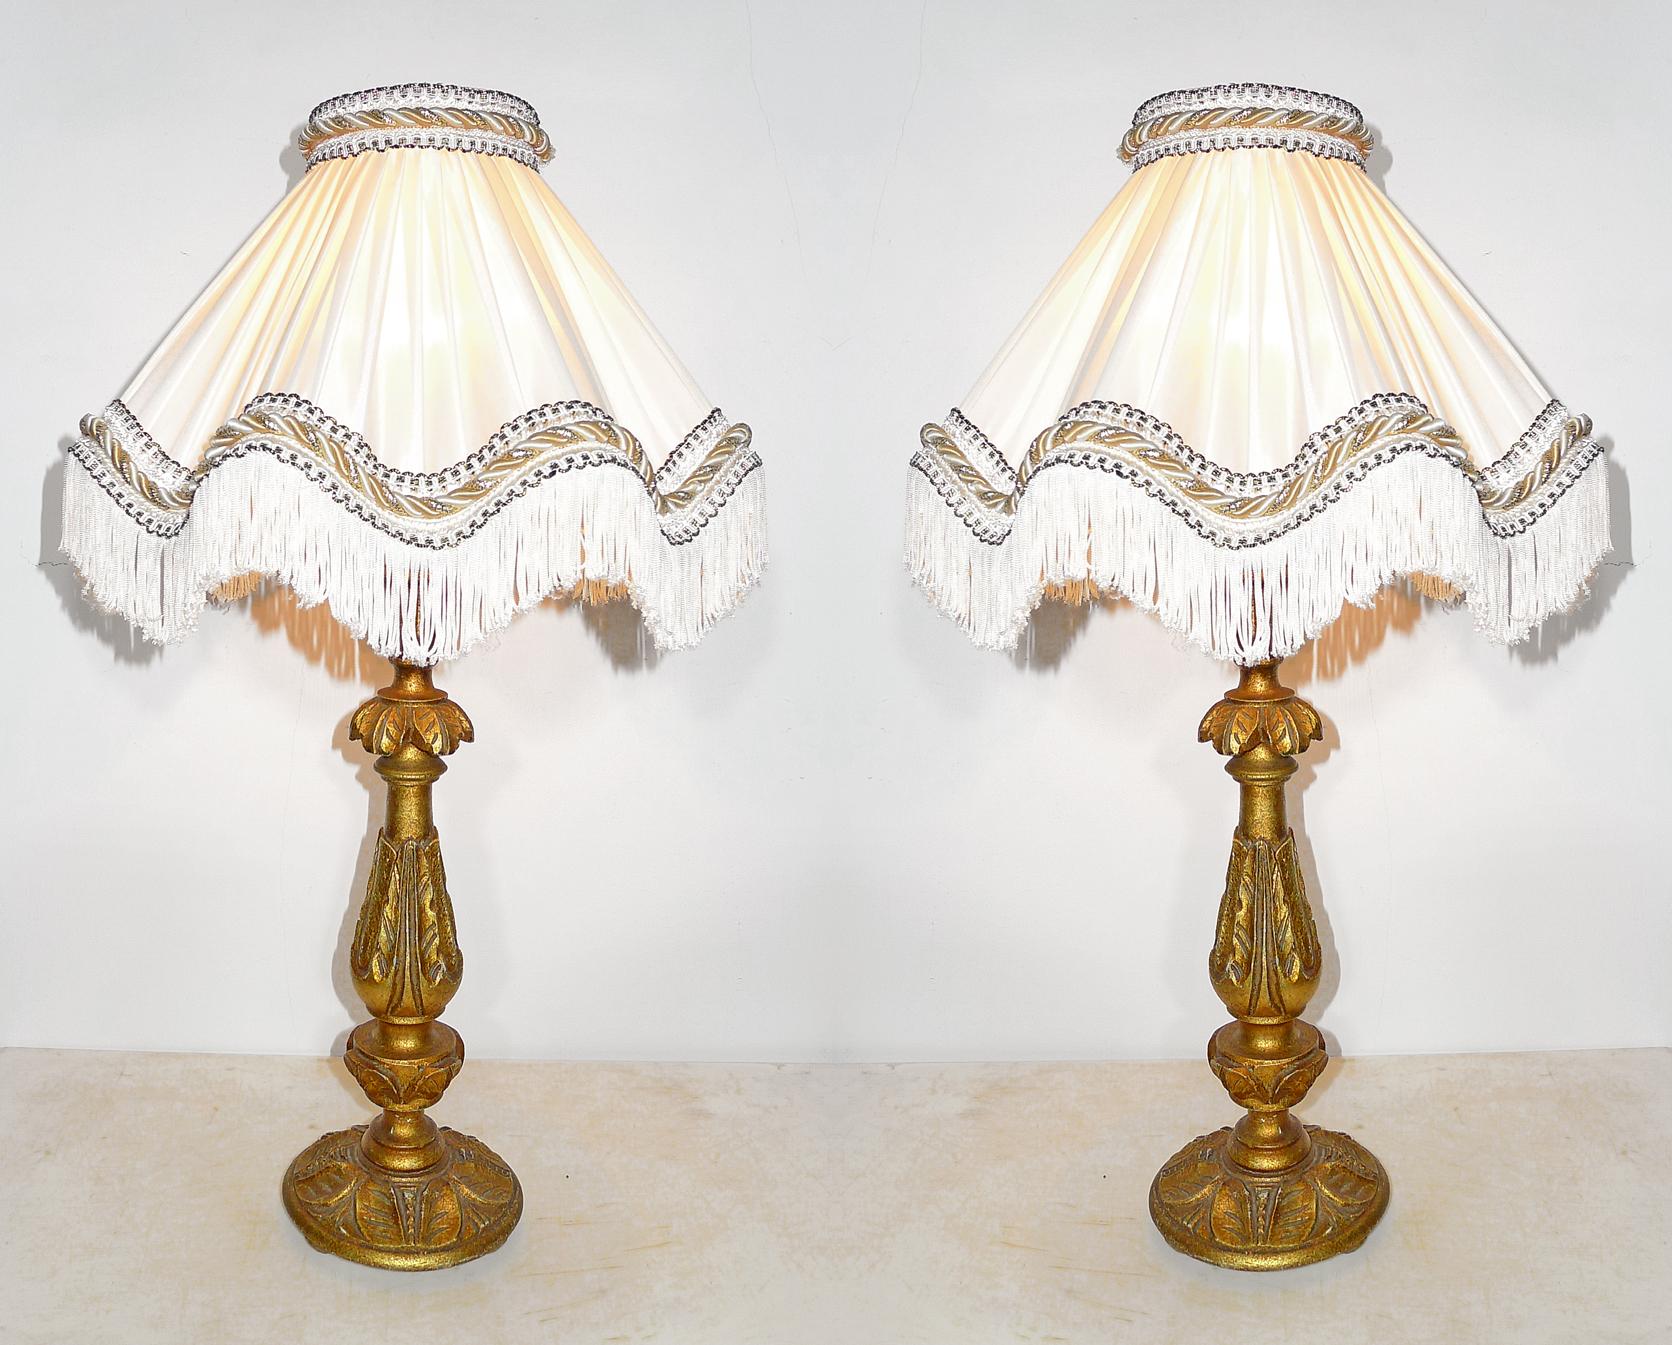 Pair of Italian Baroque Carved Giltwood Candlesticks Torchères Ivory Table Lamps (Geschnitzt)